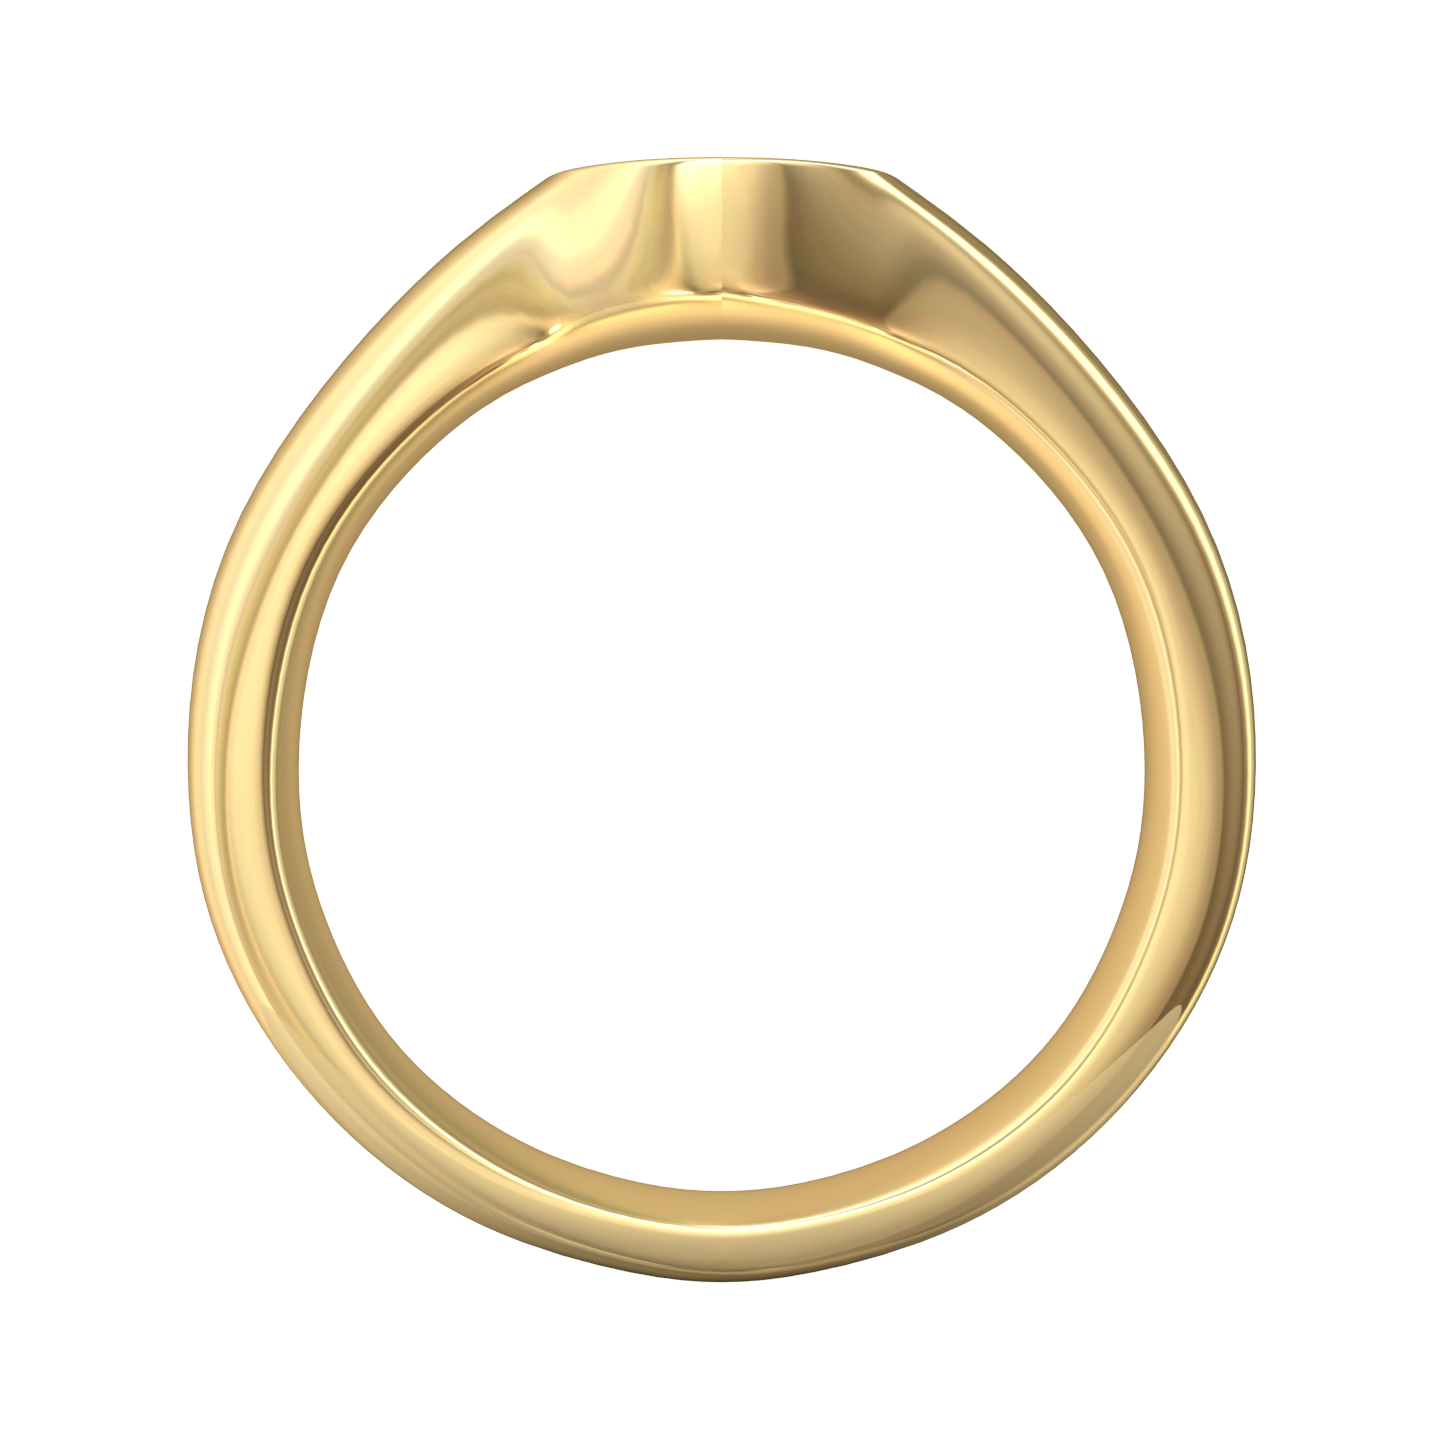 Oval Signet Ring 9x7mm  Gardiner Brothers   